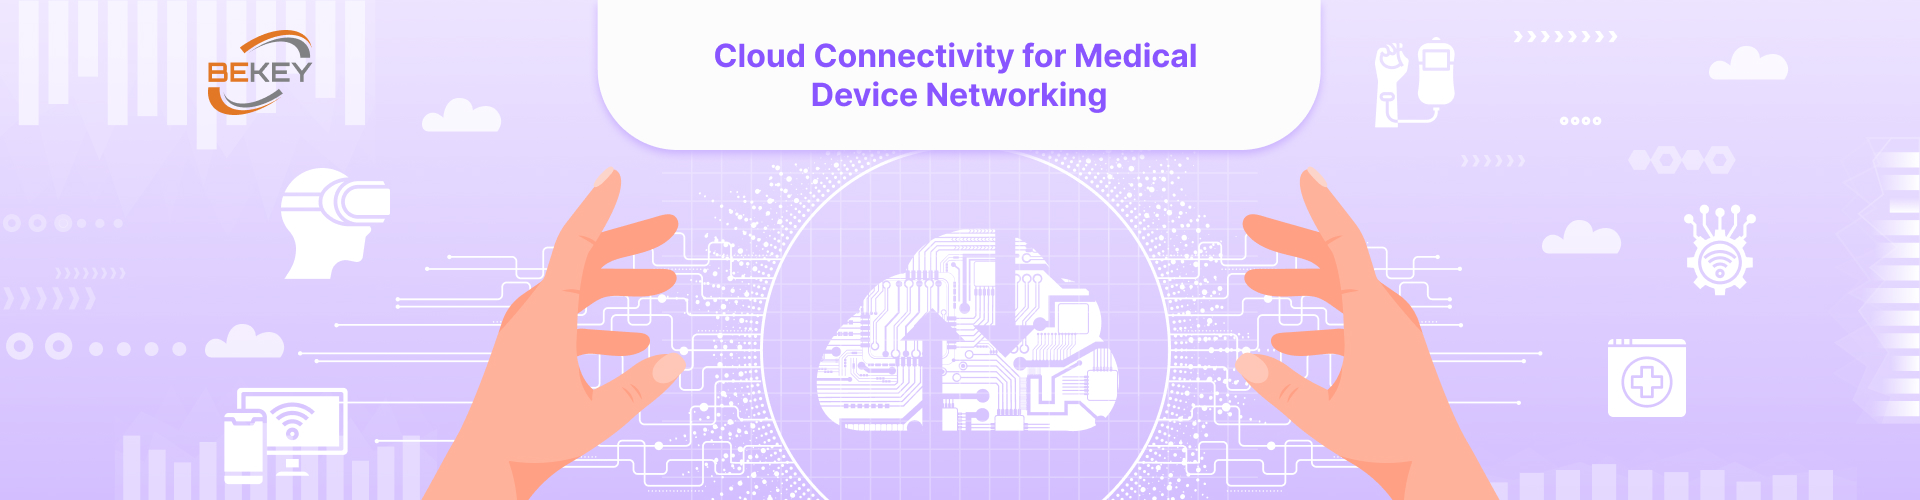 Cloud Connectivity for Medical Device Networking: Don’t Miss Out on It - image